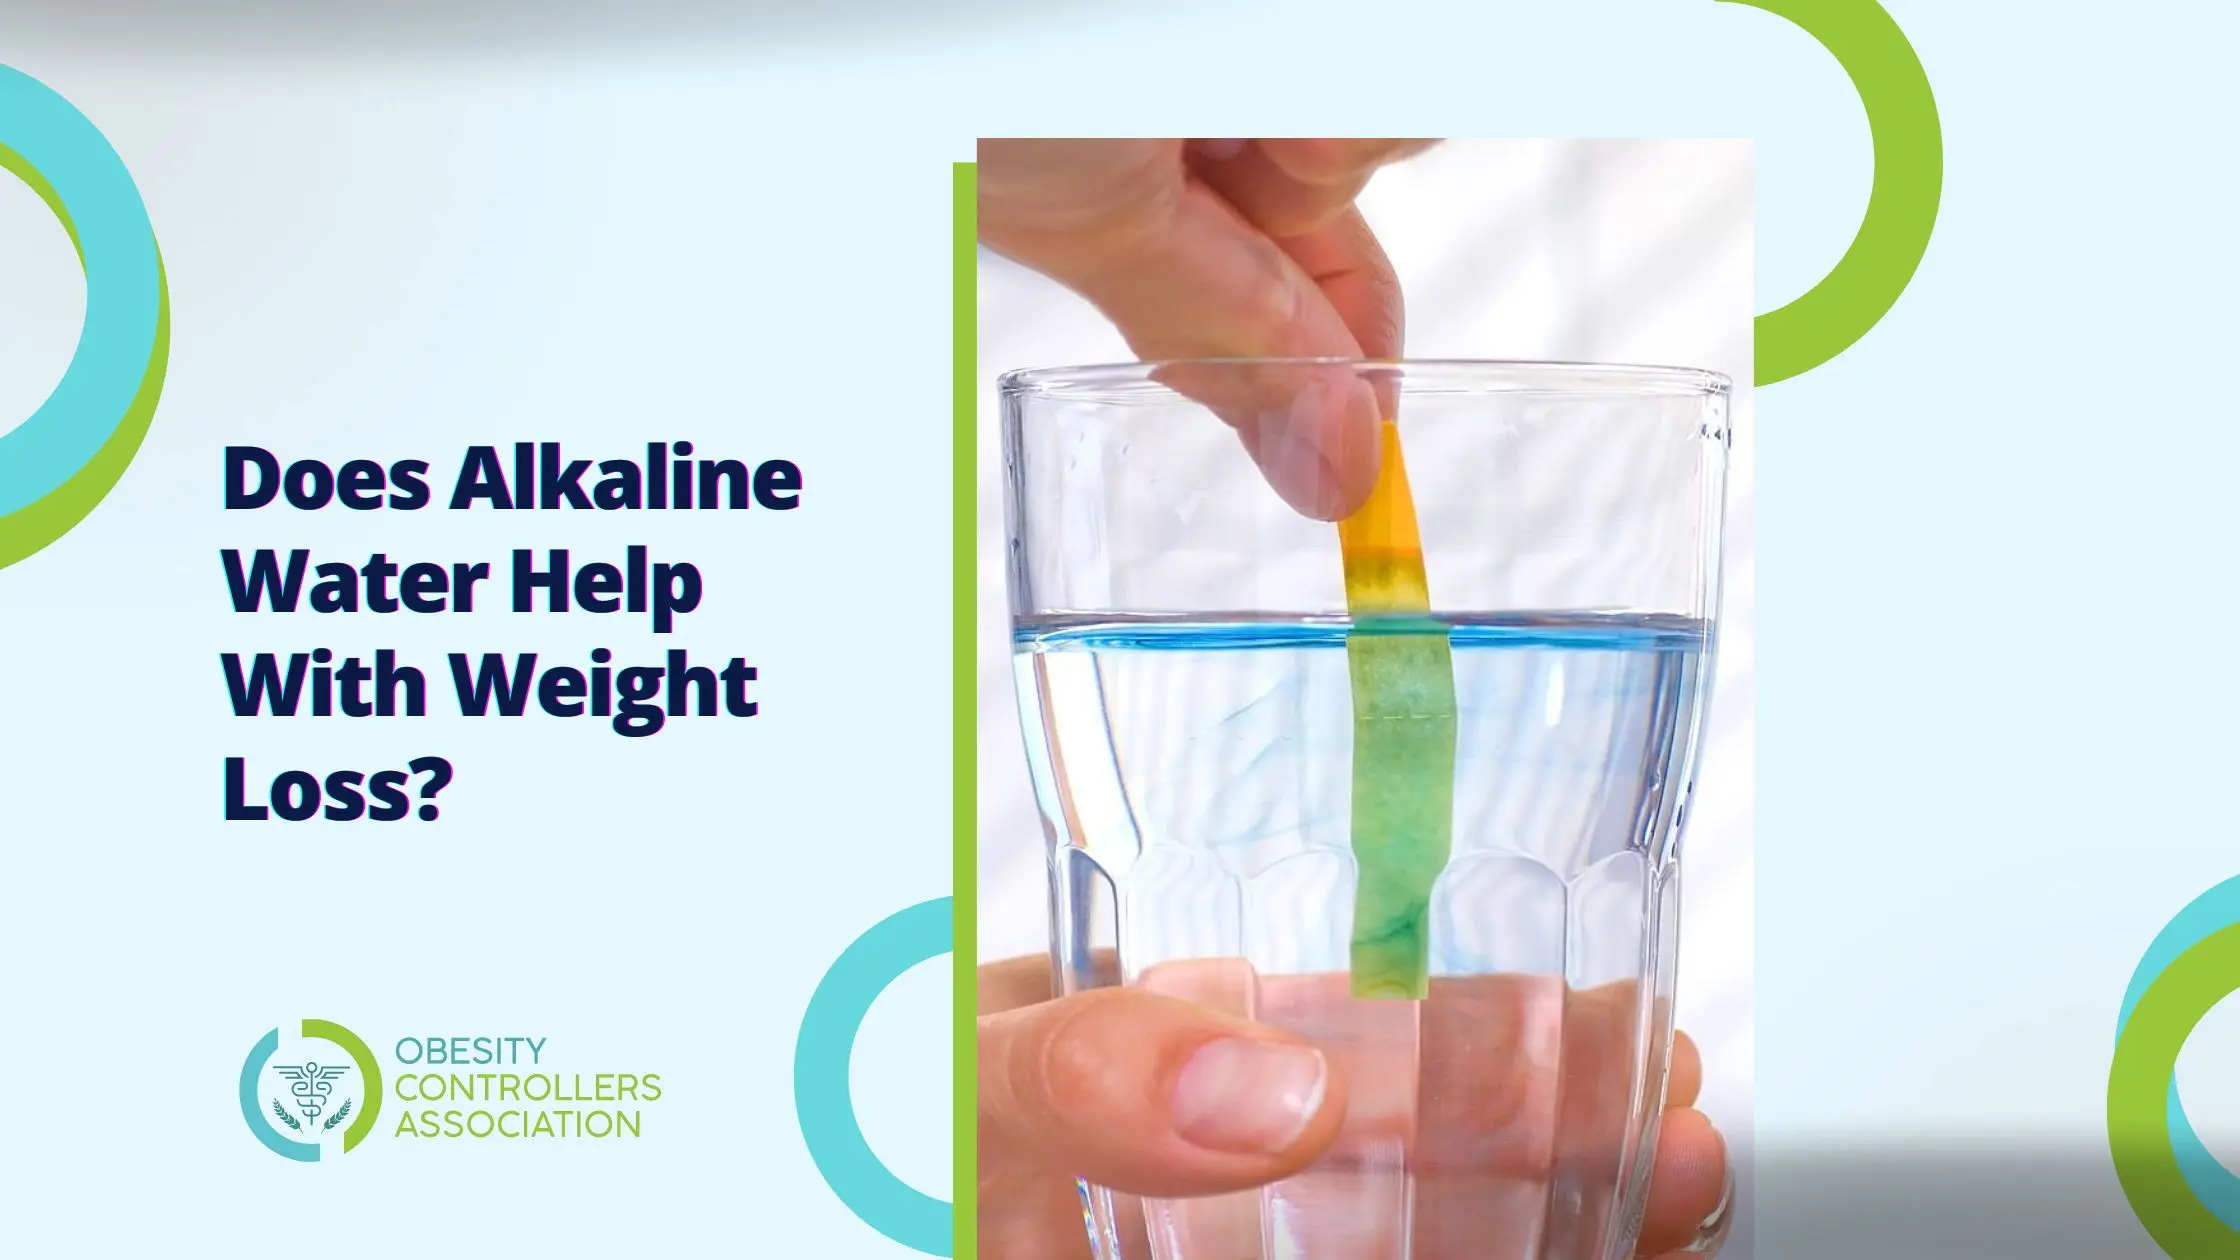 Alkaline Water Help With Weight Loss